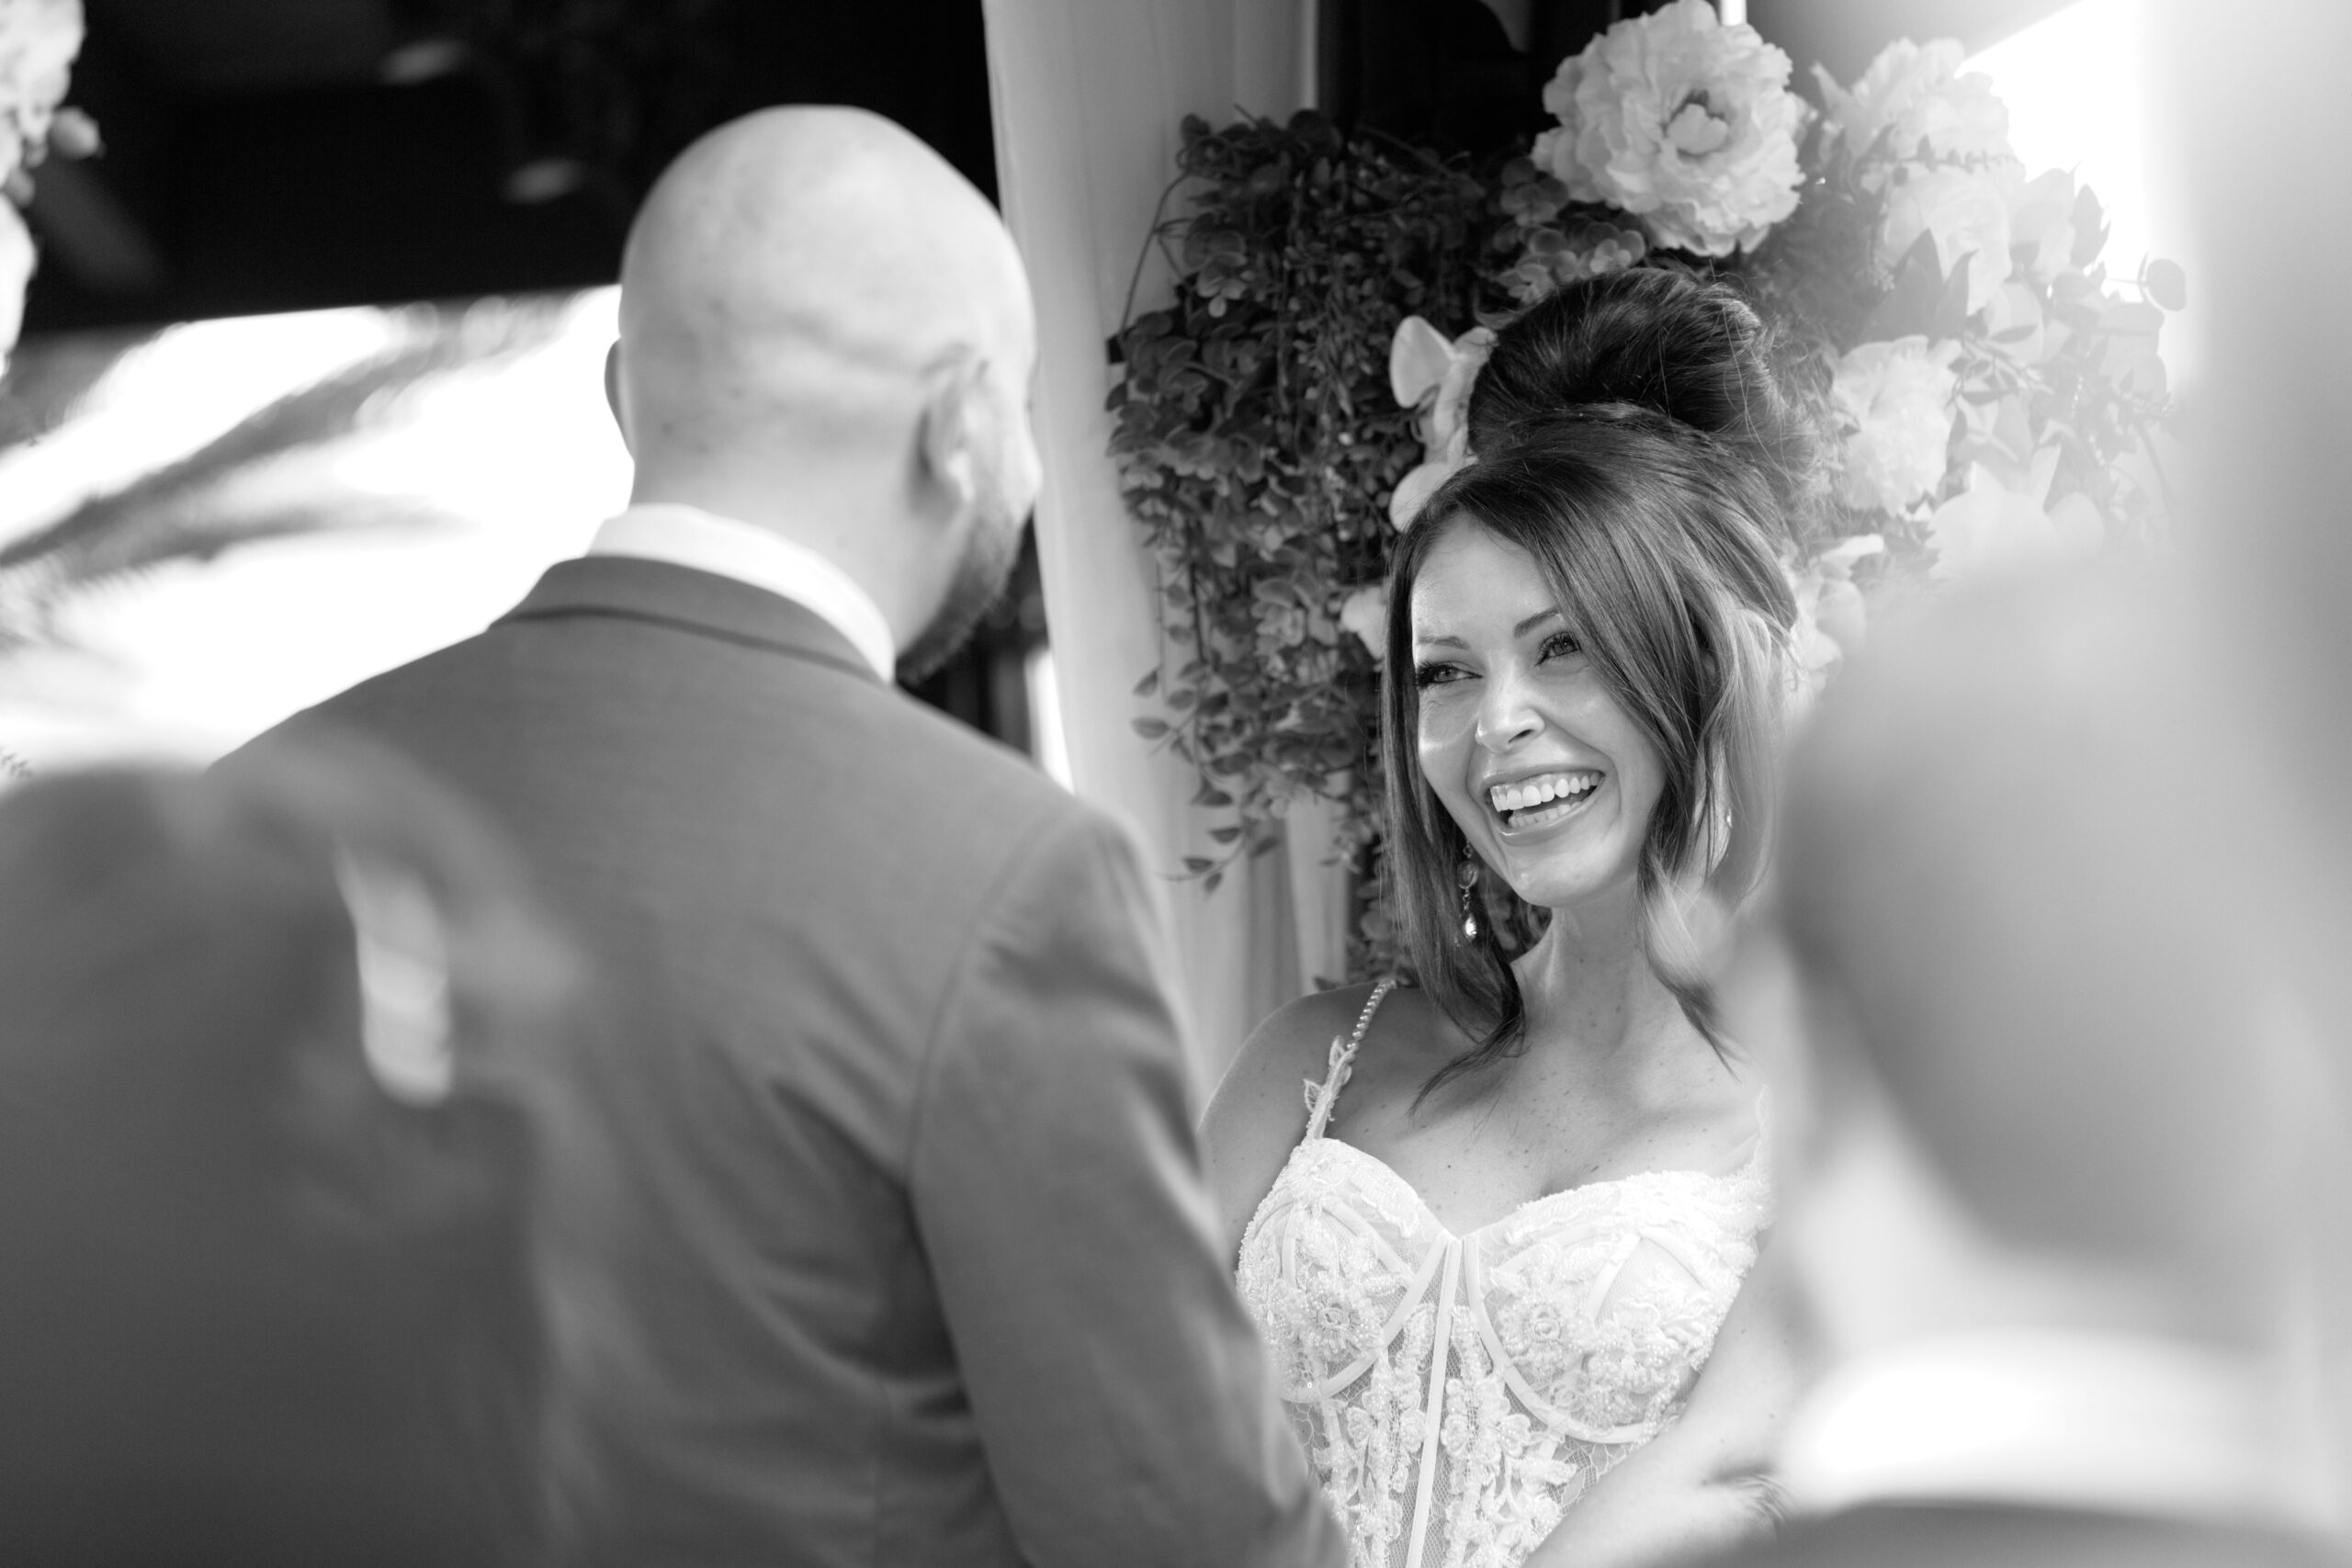 A bride and groom share a laugh during ceremony at Villa Botanica.